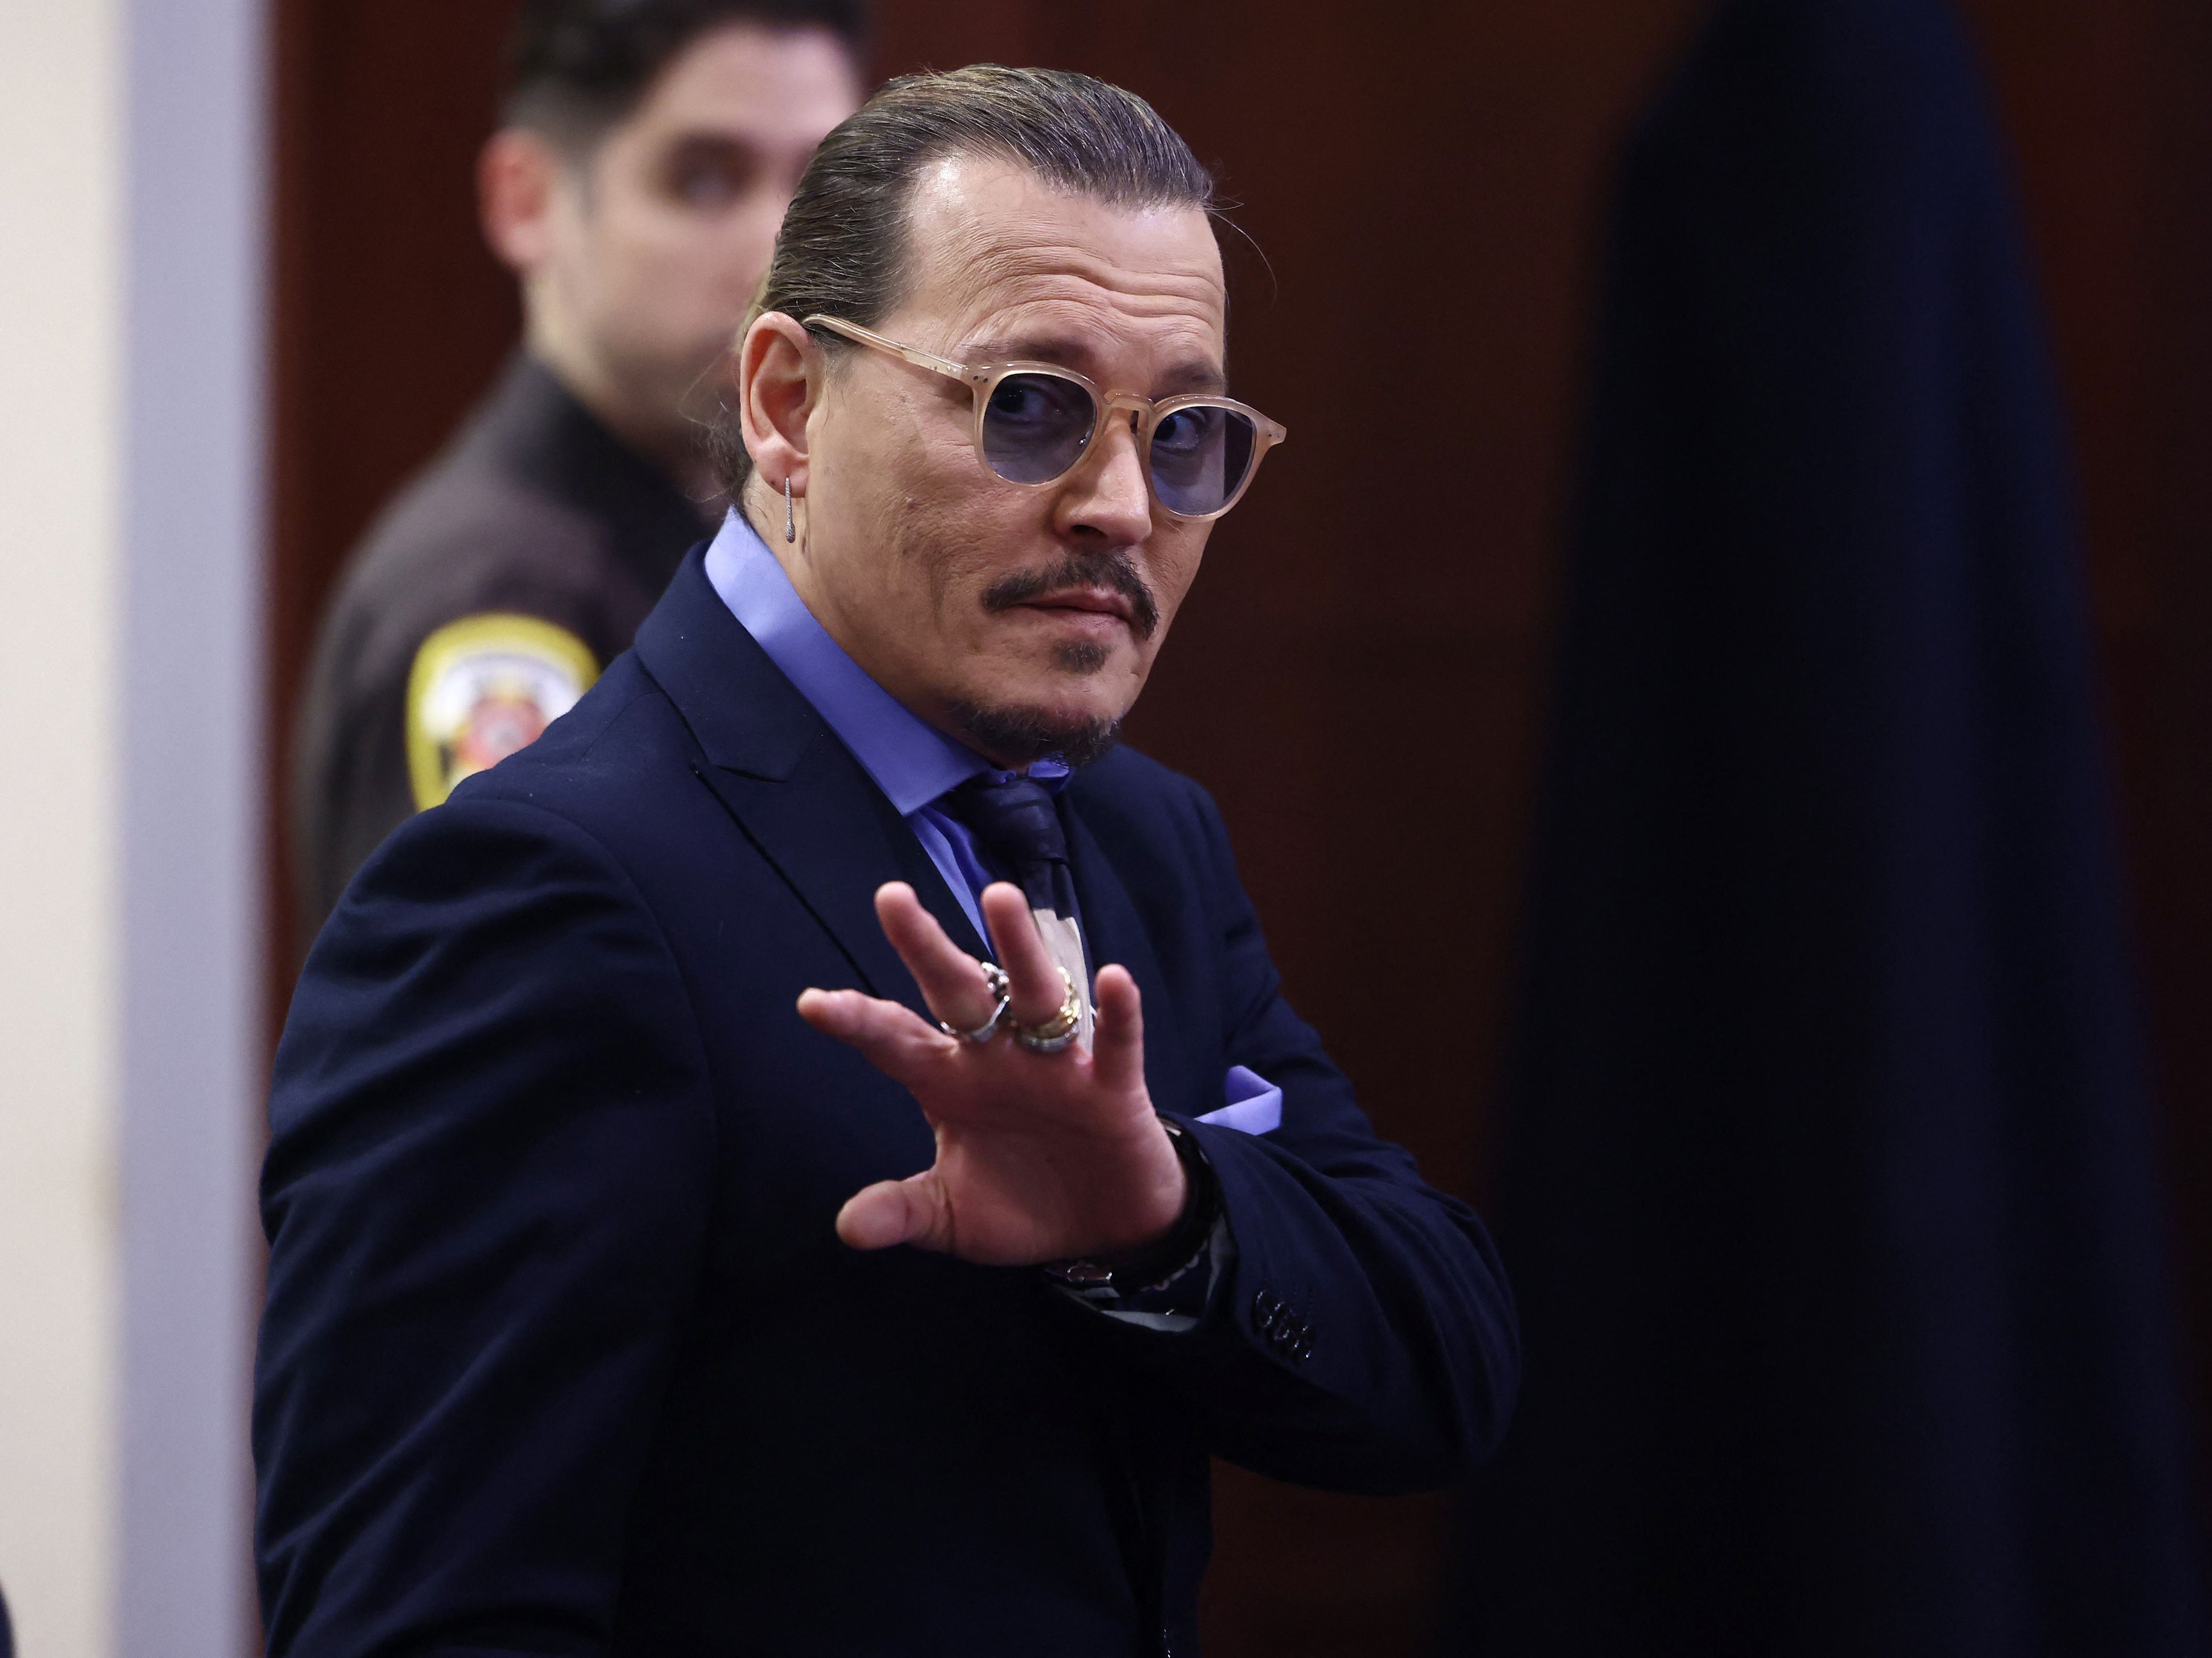 Johnny Depp at the Fairfax County Courthouse on 5 May